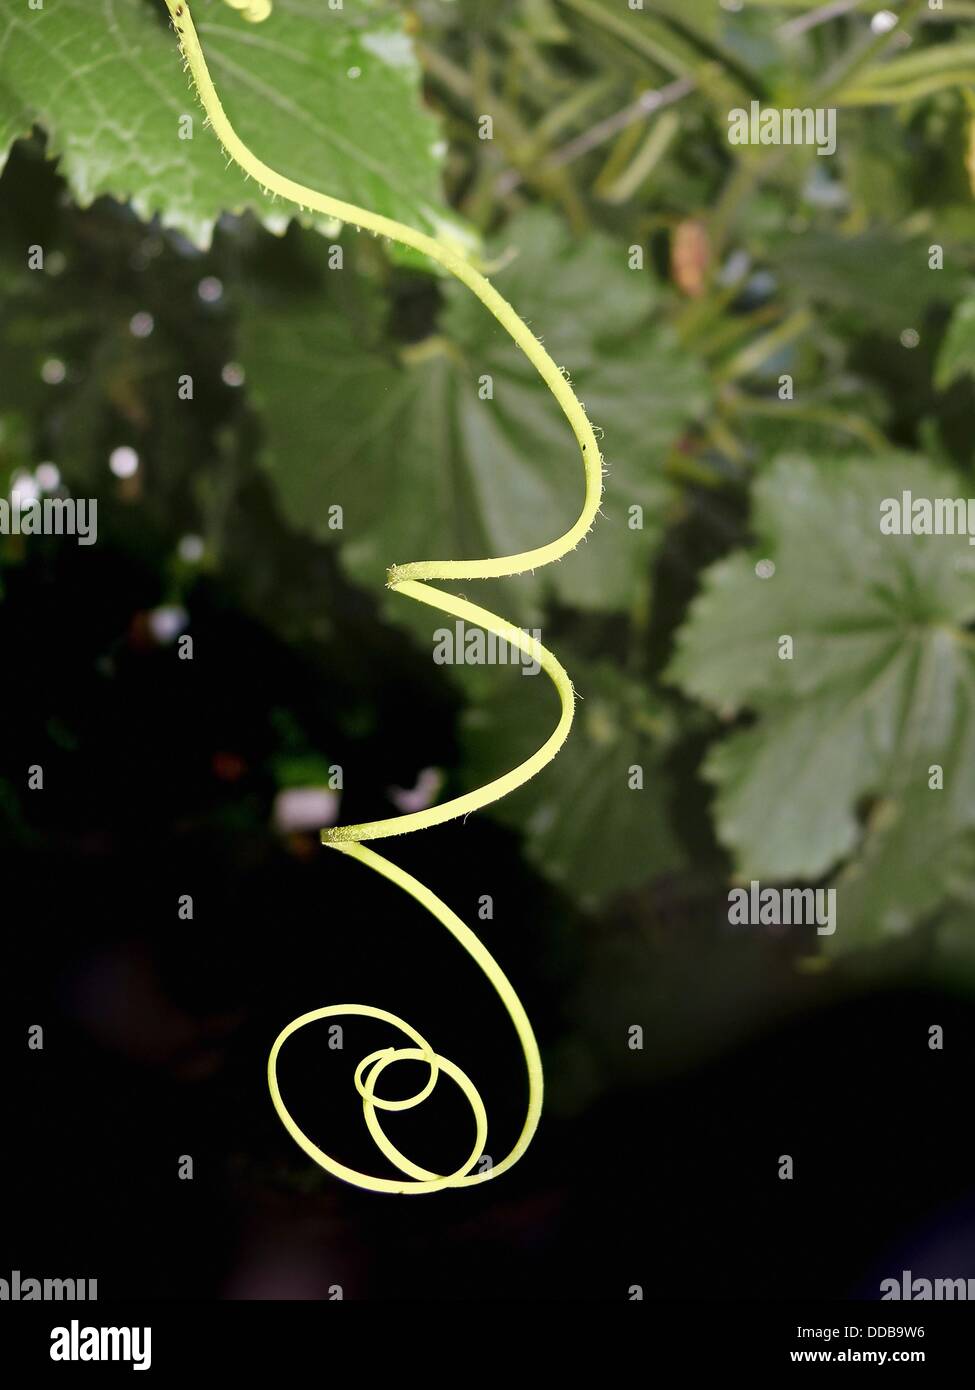 Tendril Of A Bitter Gourd Vegetable Creeping Plant Stock Photo Alamy